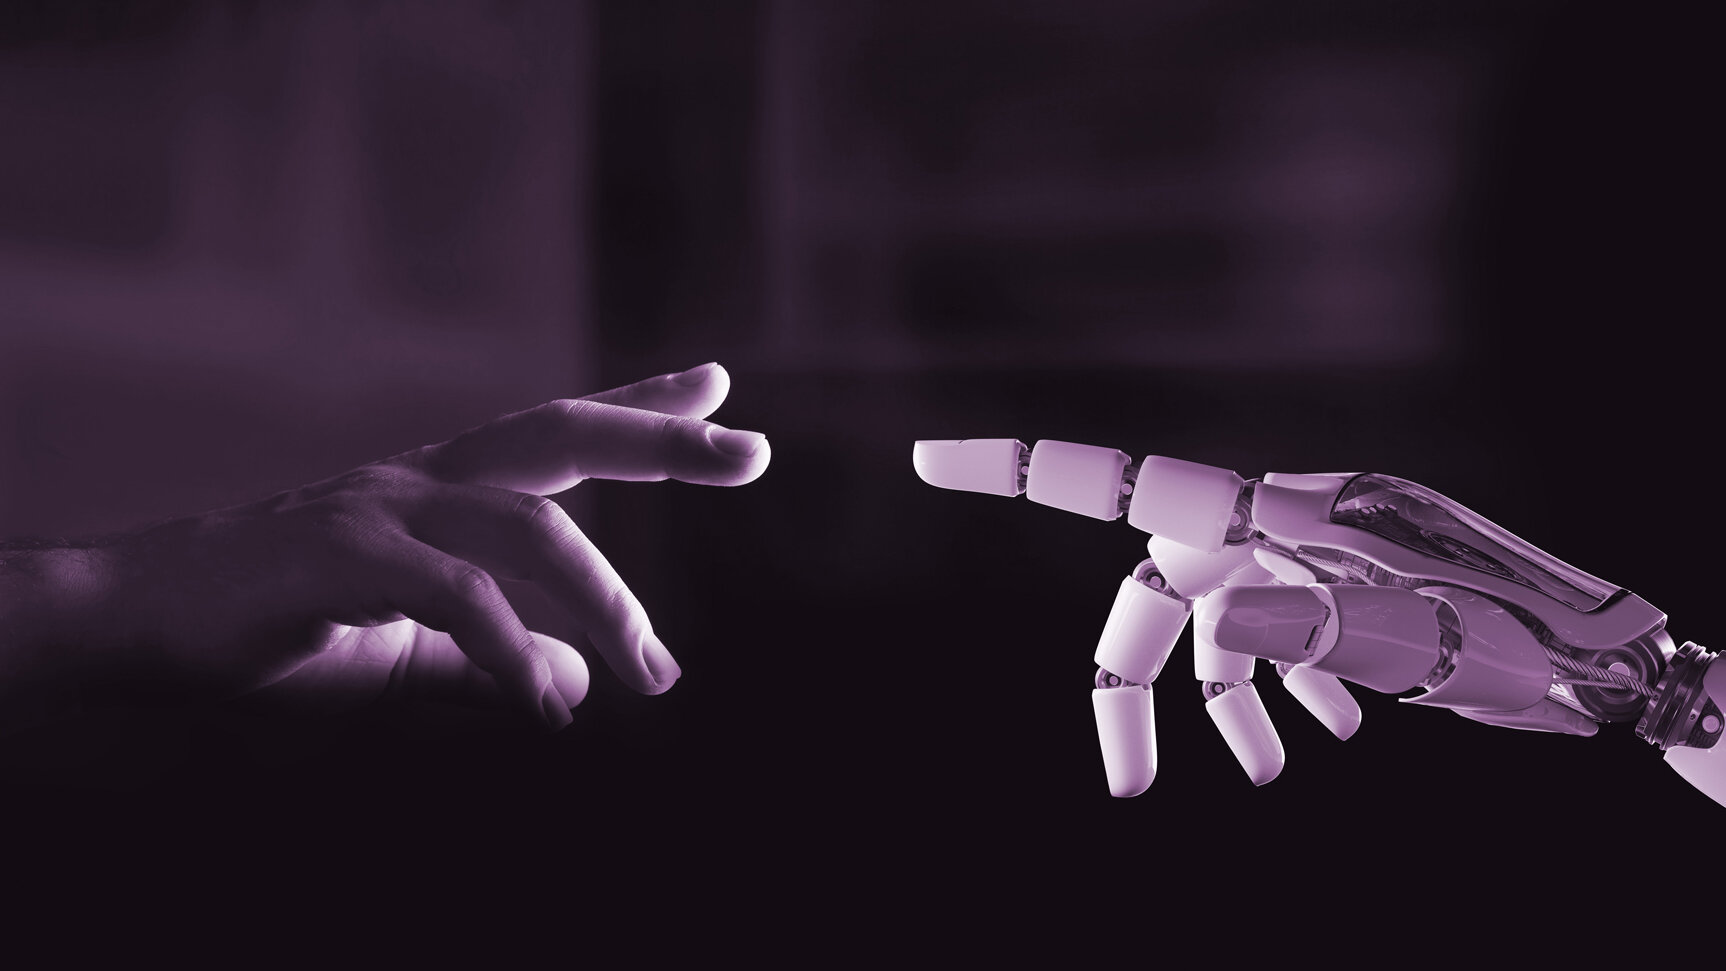 https://stock.adobe.com/de/images/white-cyborg-finger-about-to-touch-human-finger-3d-rendering/209433187 Branches; White cyborg finger about to touch human finger